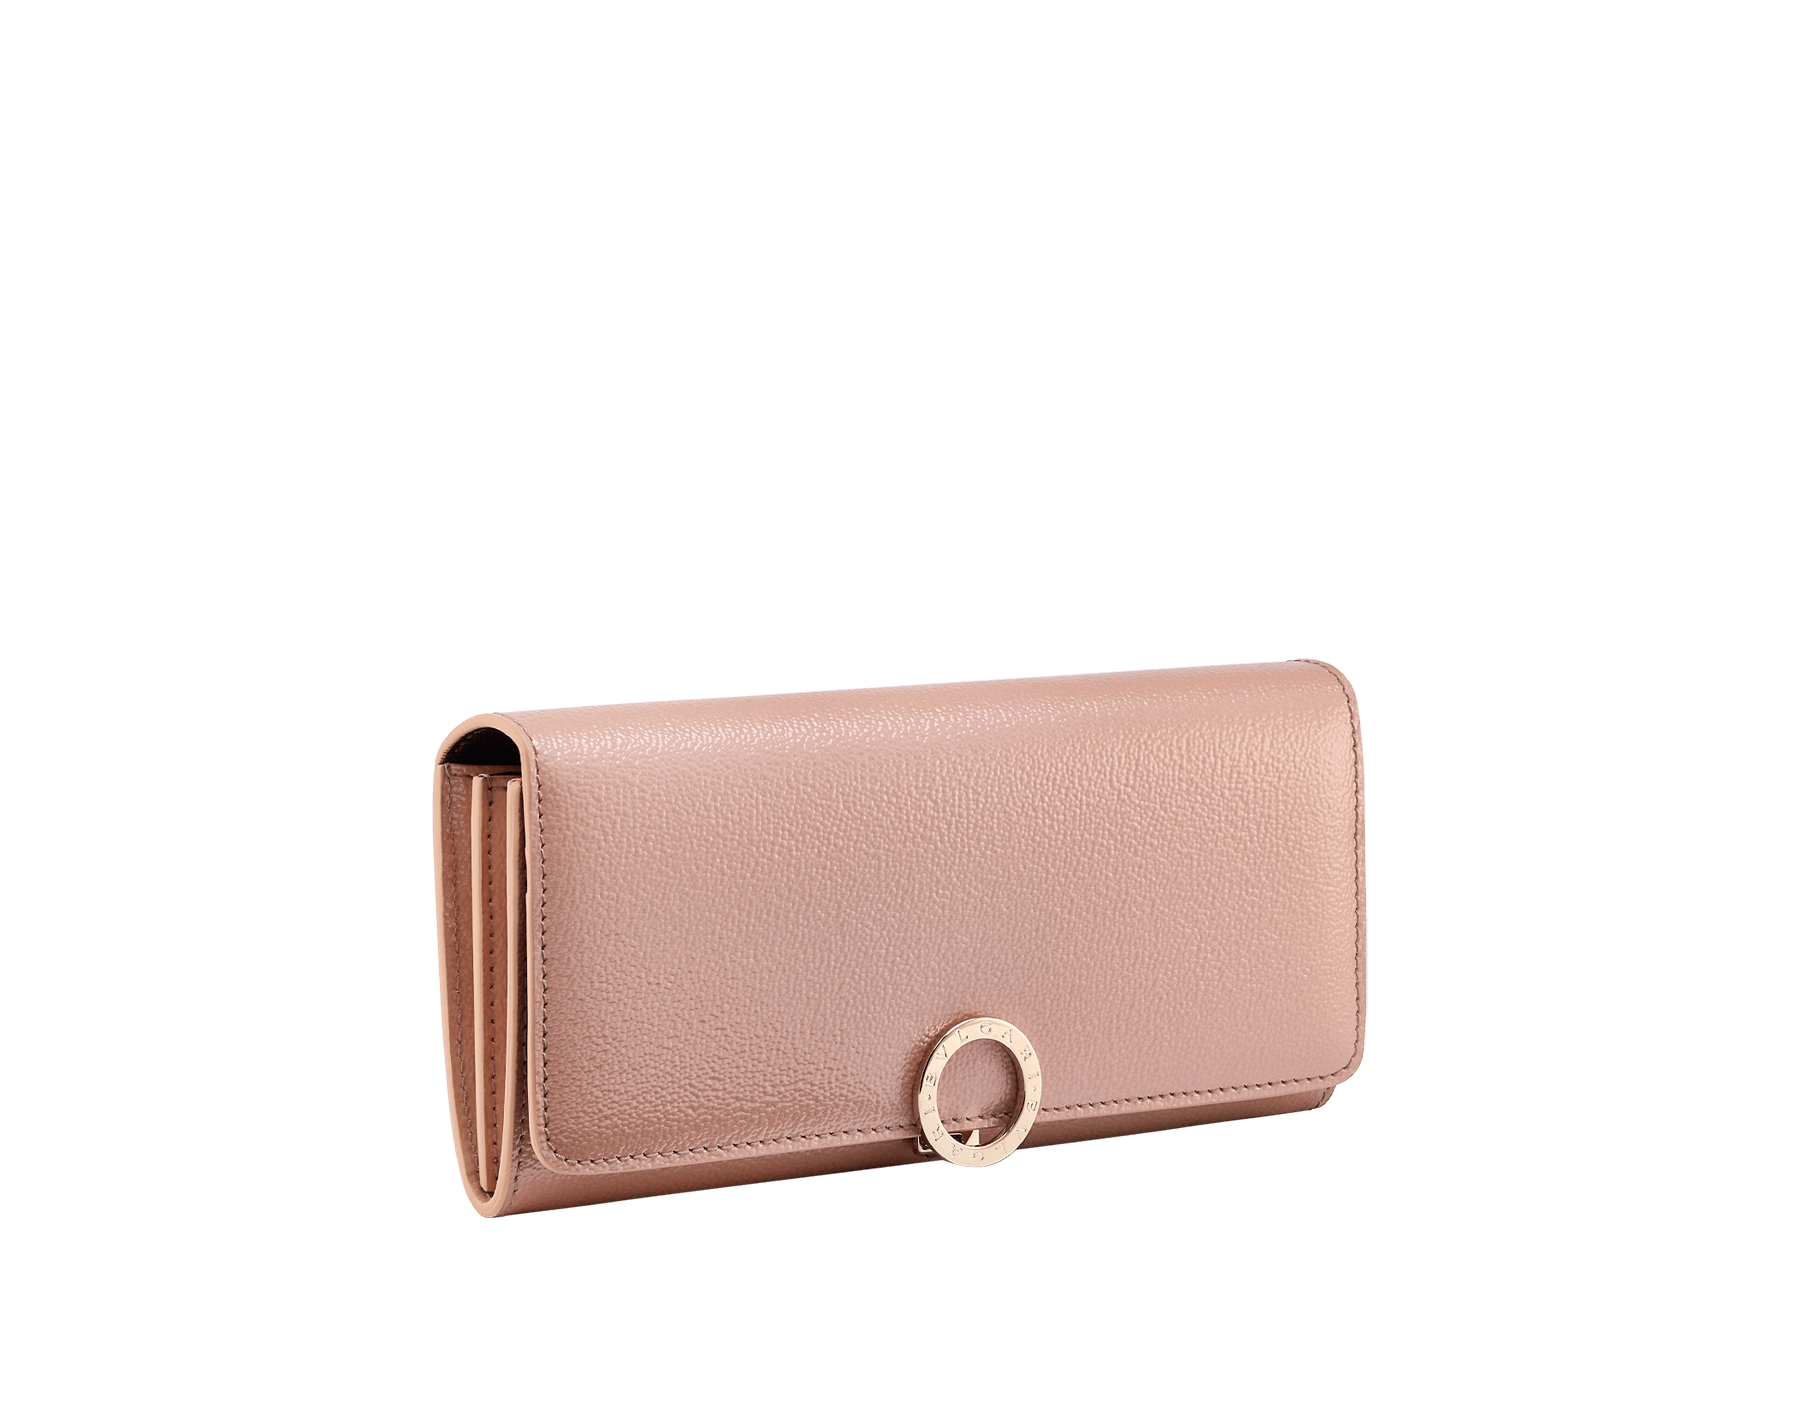 BULGARI BULGARI large wallet in grained, patent-finish, amaranth garnet red Urban calf leather with black calf leather interior. Iconic light gold-plated brass clip with flap closure. 579-WLT-SLI-POC-UVCL image 1